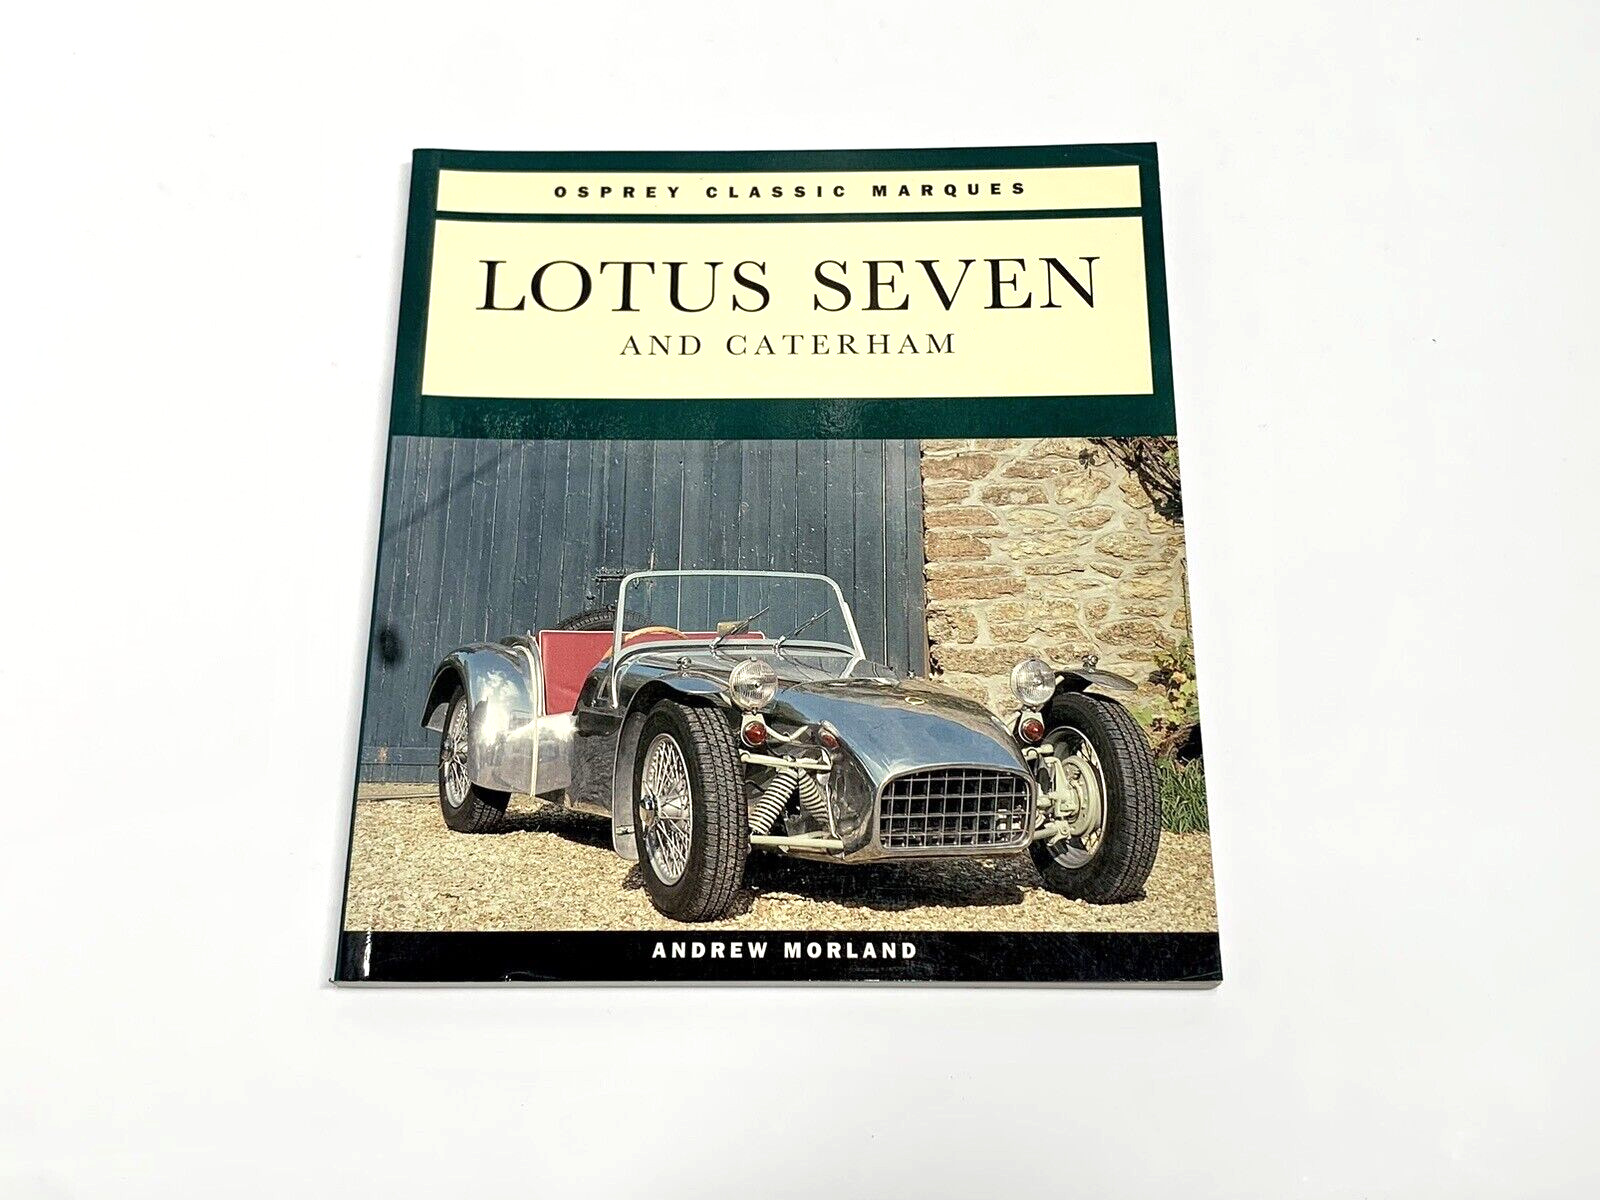 Lotus Seven 7 and Caterham By Andrew Morland, Osprey Classic Marques Paperback